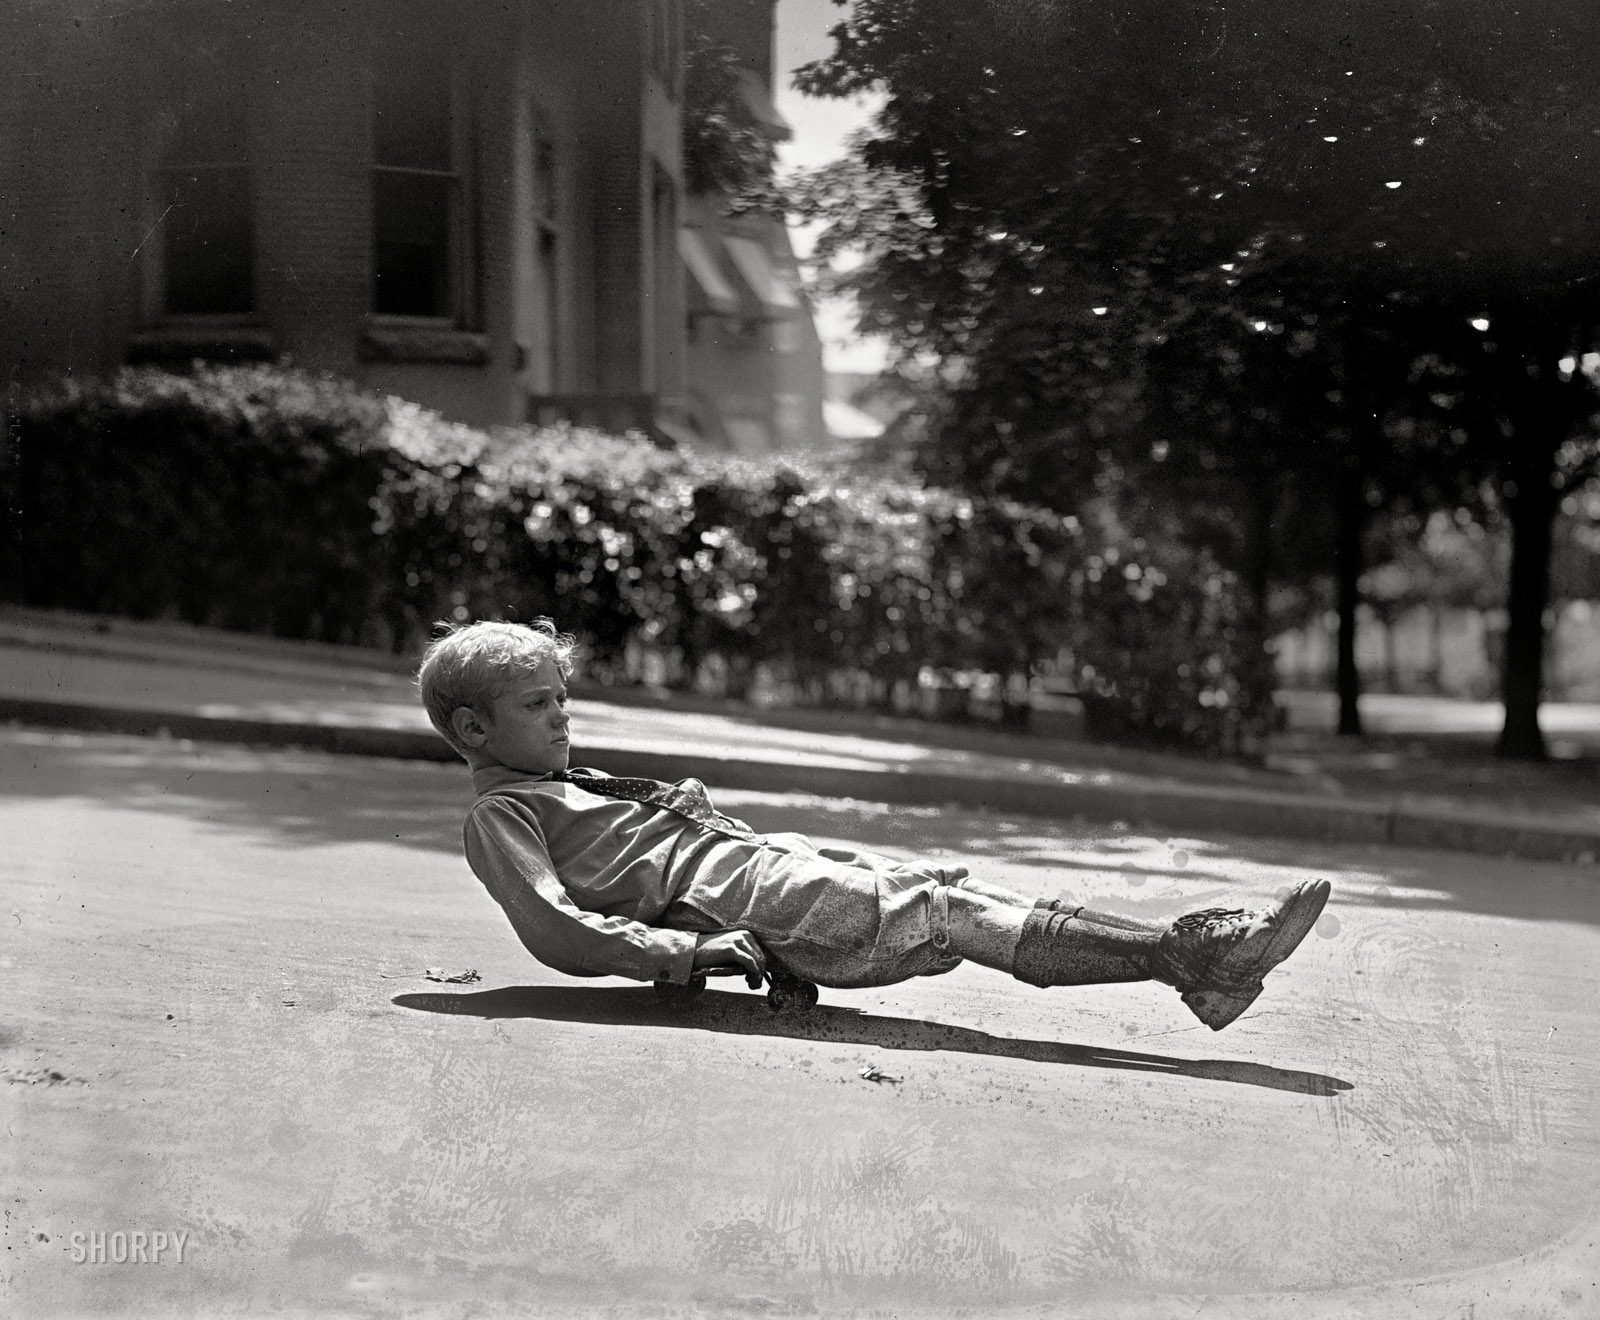 September 15, 1922. Clarence Sherrill, son of the Washington, D.C., superintendent of public buildings. National Photo Co. View full size.